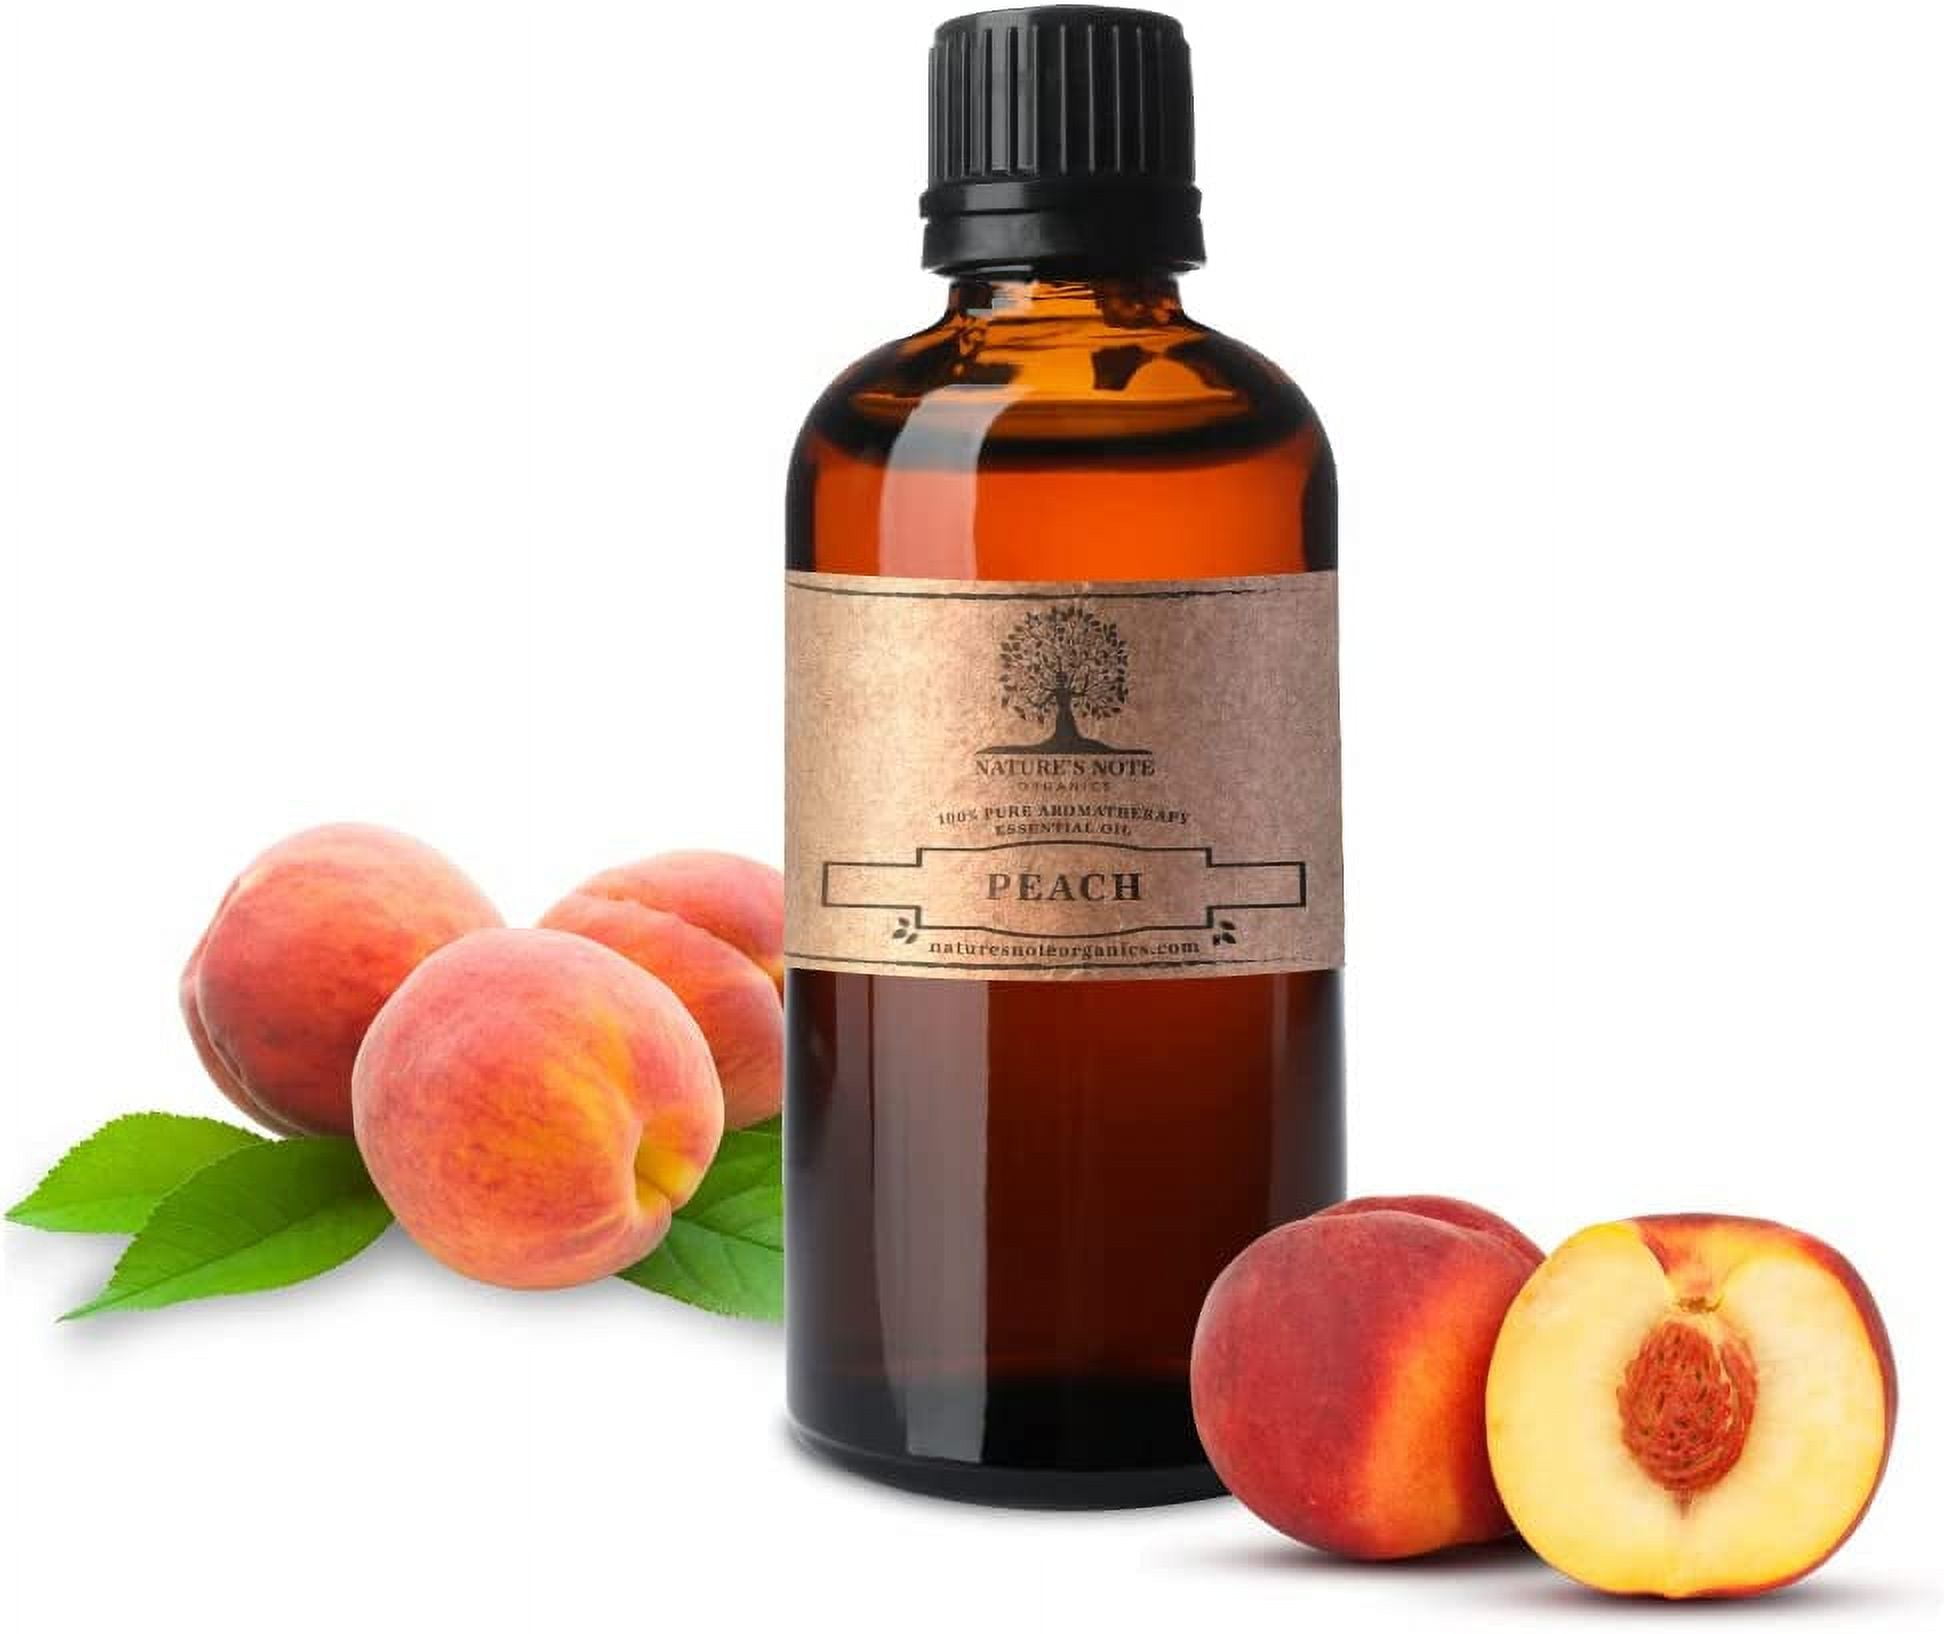  Peach Essential Oils Organic Plant & Natural Pure Oil for  Diffuser, Humidifier, Massage, Skin & Hair Care-2 Pack x10ml : Health &  Household